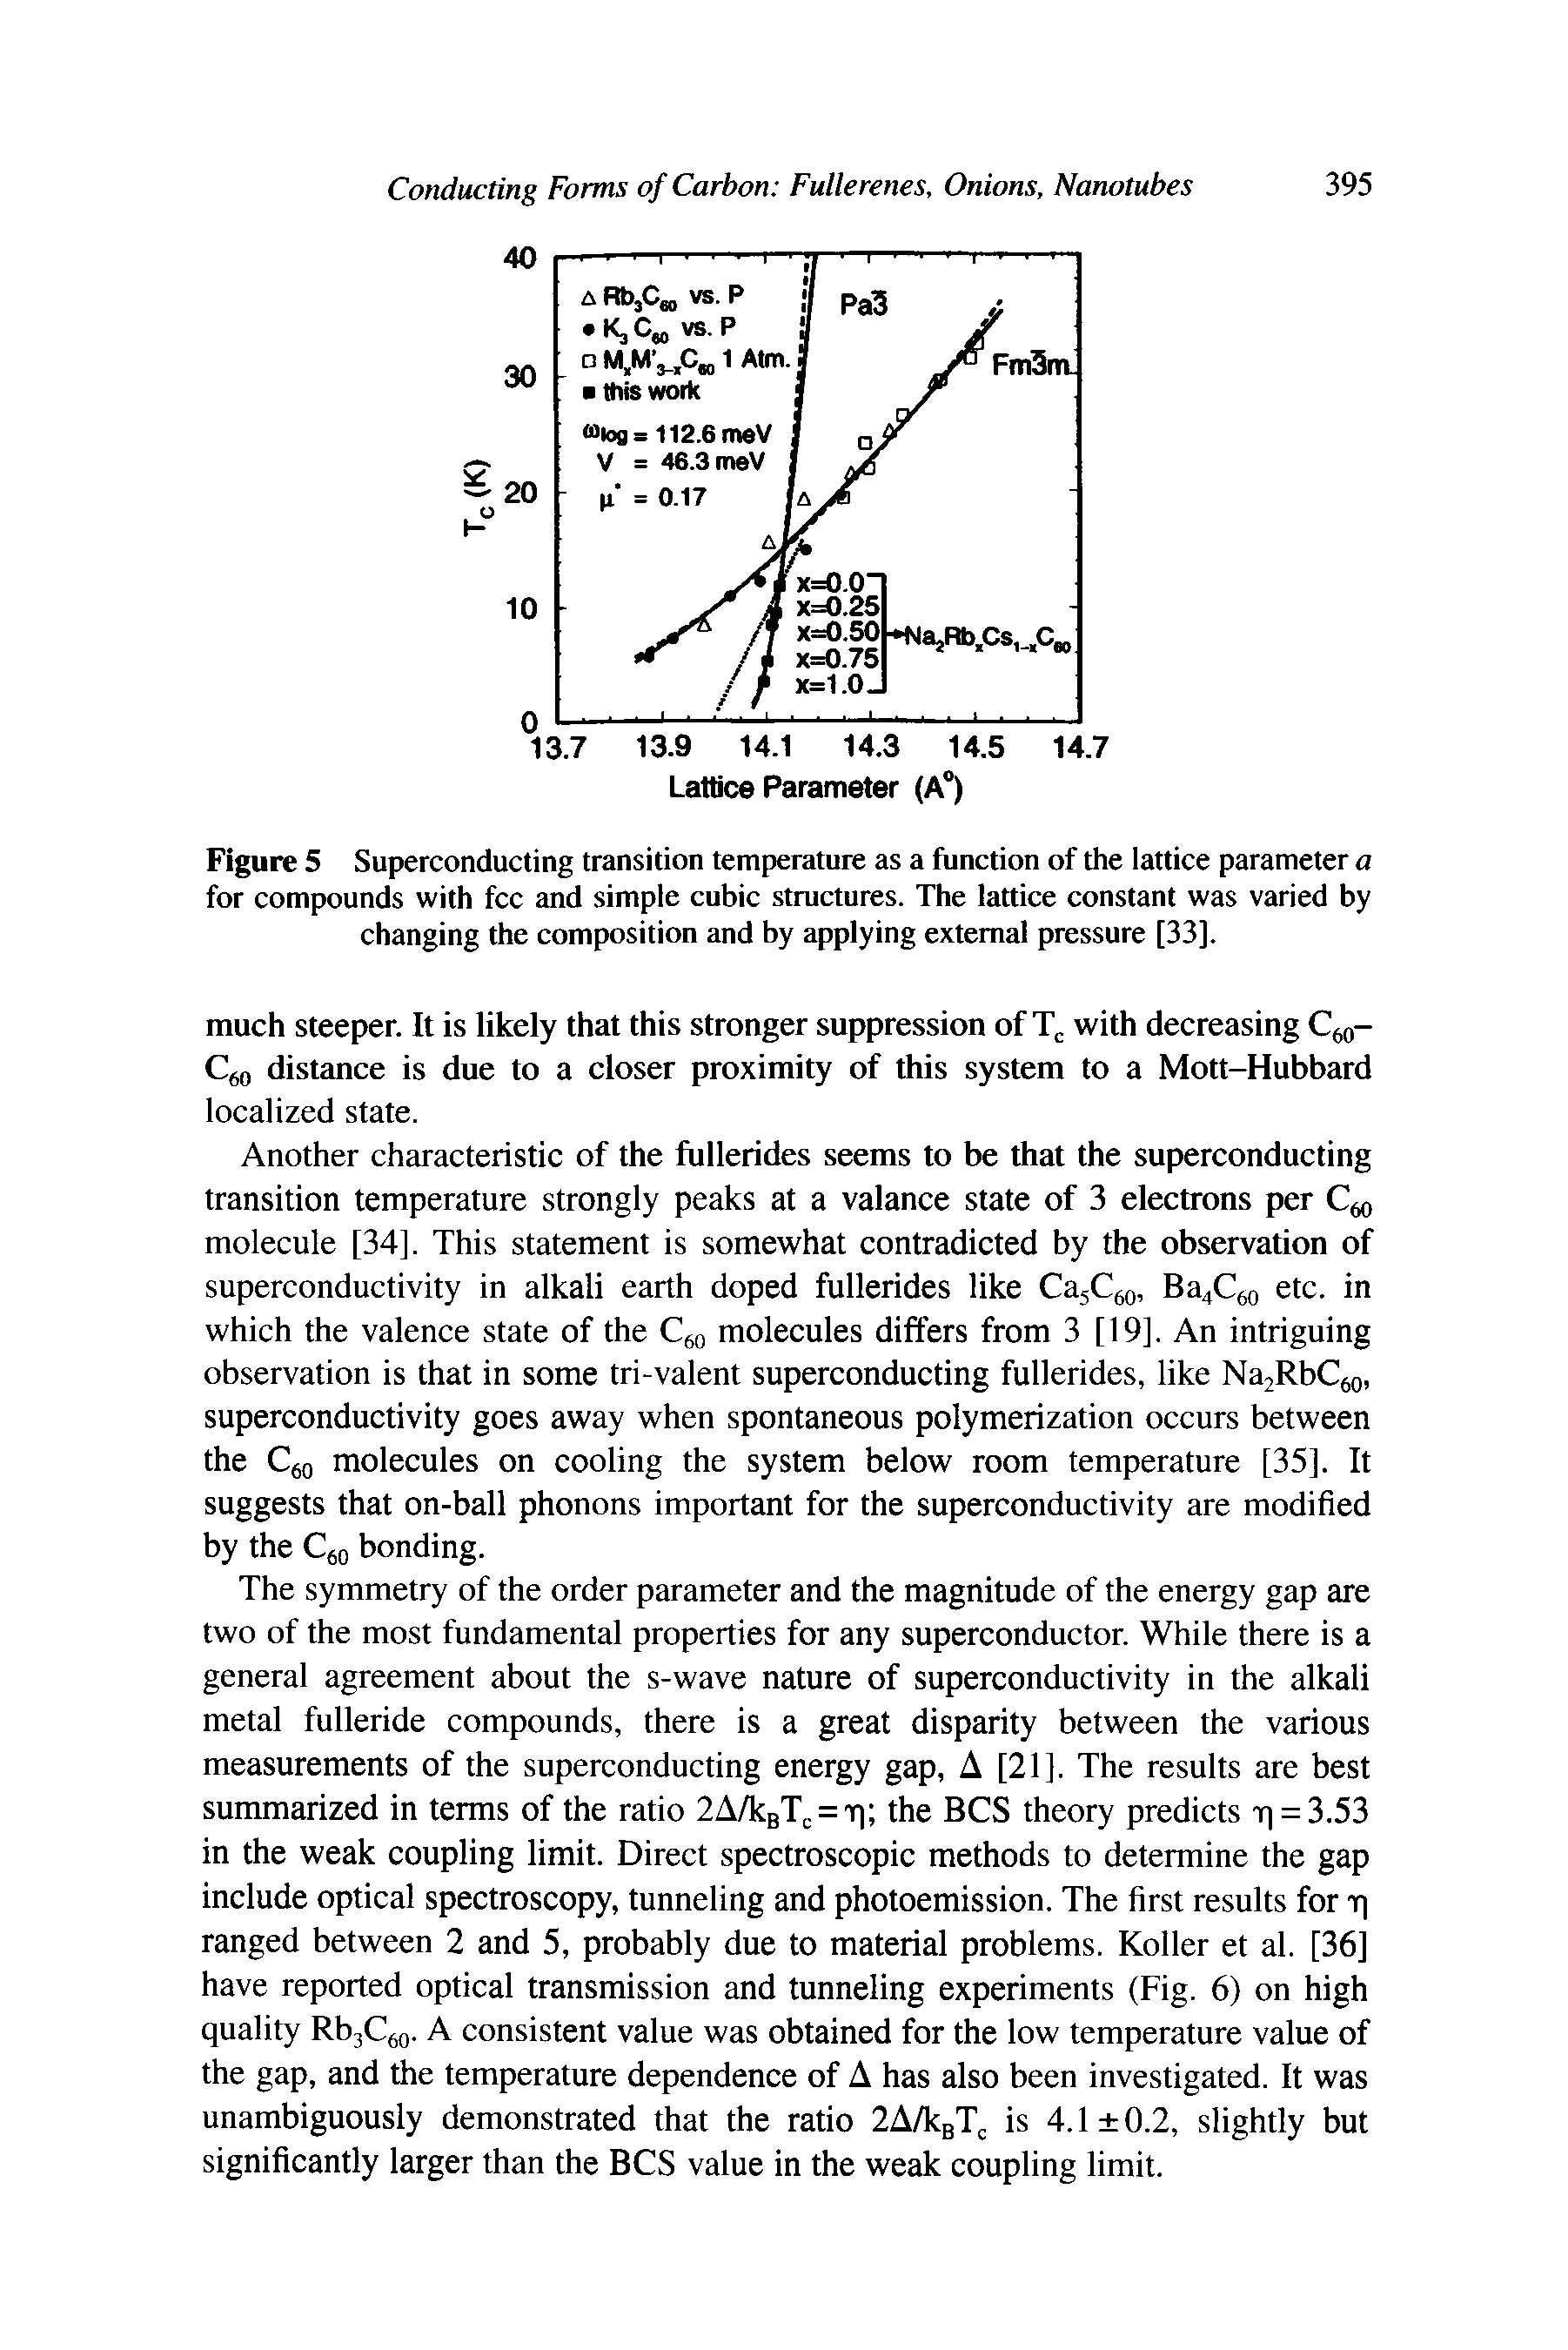 Figure 5 Superconducting transition temperature as a function of the lattice parameter a for compounds with fee and simple cubic structures. The lattice constant was varied by changing the composition and by applying external pressure [33],...